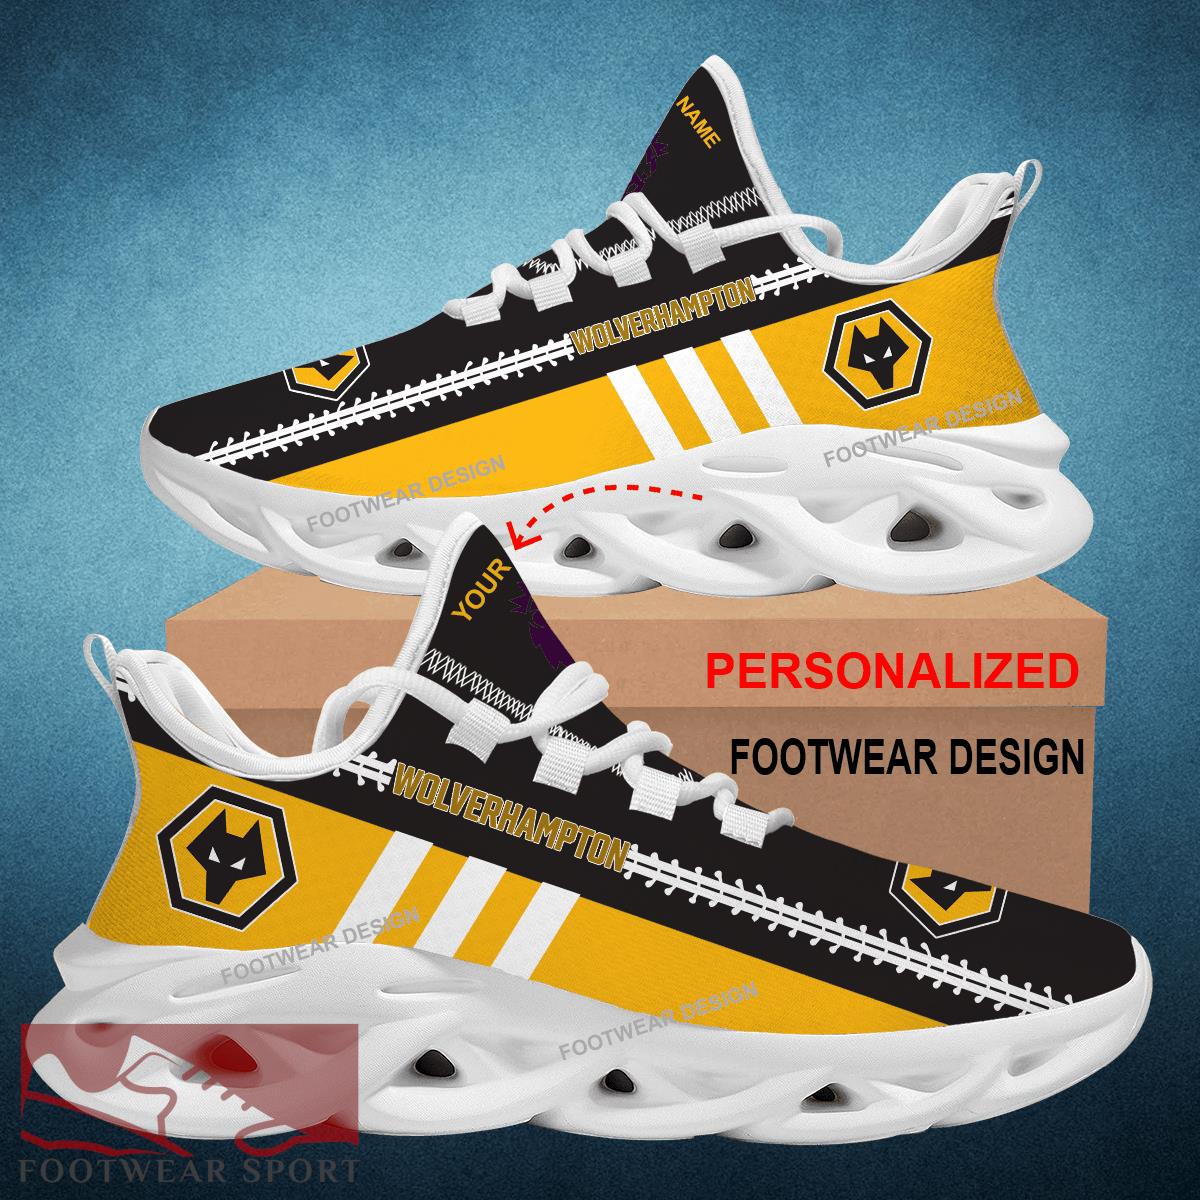 EPL Wolverhampton Wanderers Chunky Shoes New Design Gift Fans Max Soul Sneakers Personalized - EPL Wolverhampton Wanderers Logo New Chunky Shoes Photo 2